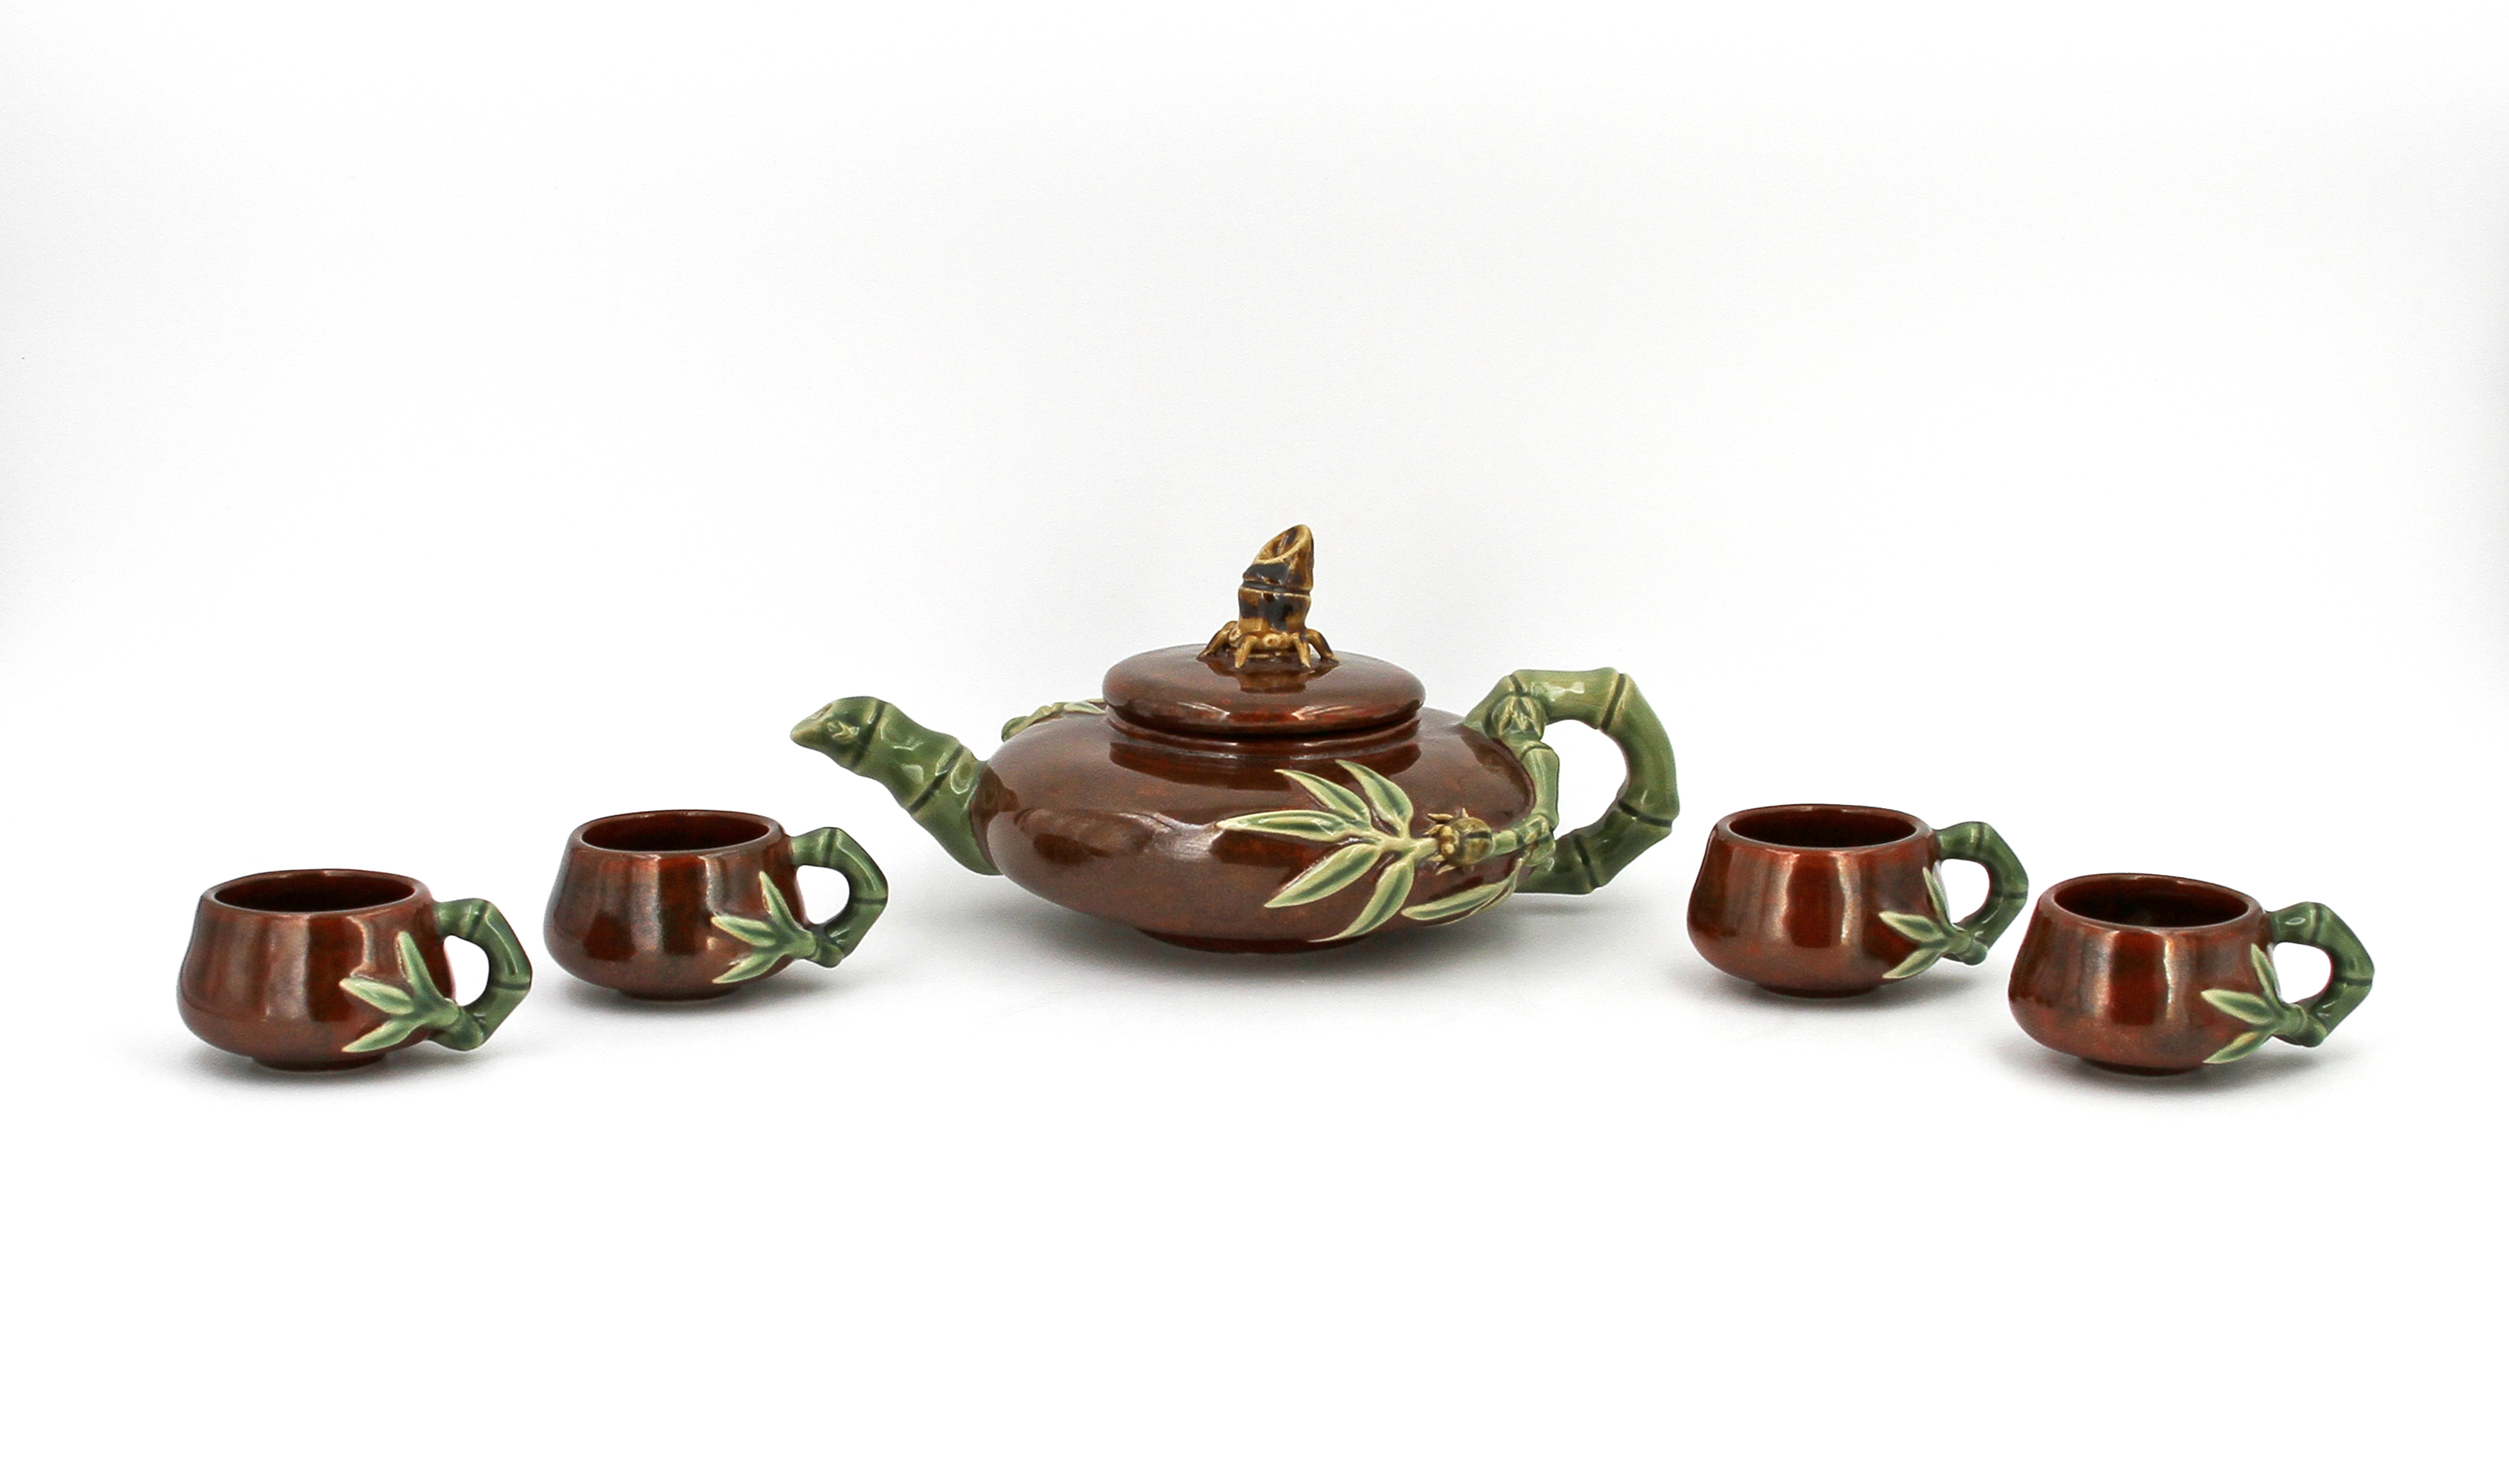 Brown glazed tea set, including a teapot with lid and four cups, all with green bamboo handles and designs. Presented by Donald Tsang Yam-Kuen, Chief Executive of the Hong Kong Special Administrative Region of the People’s Republic of China.